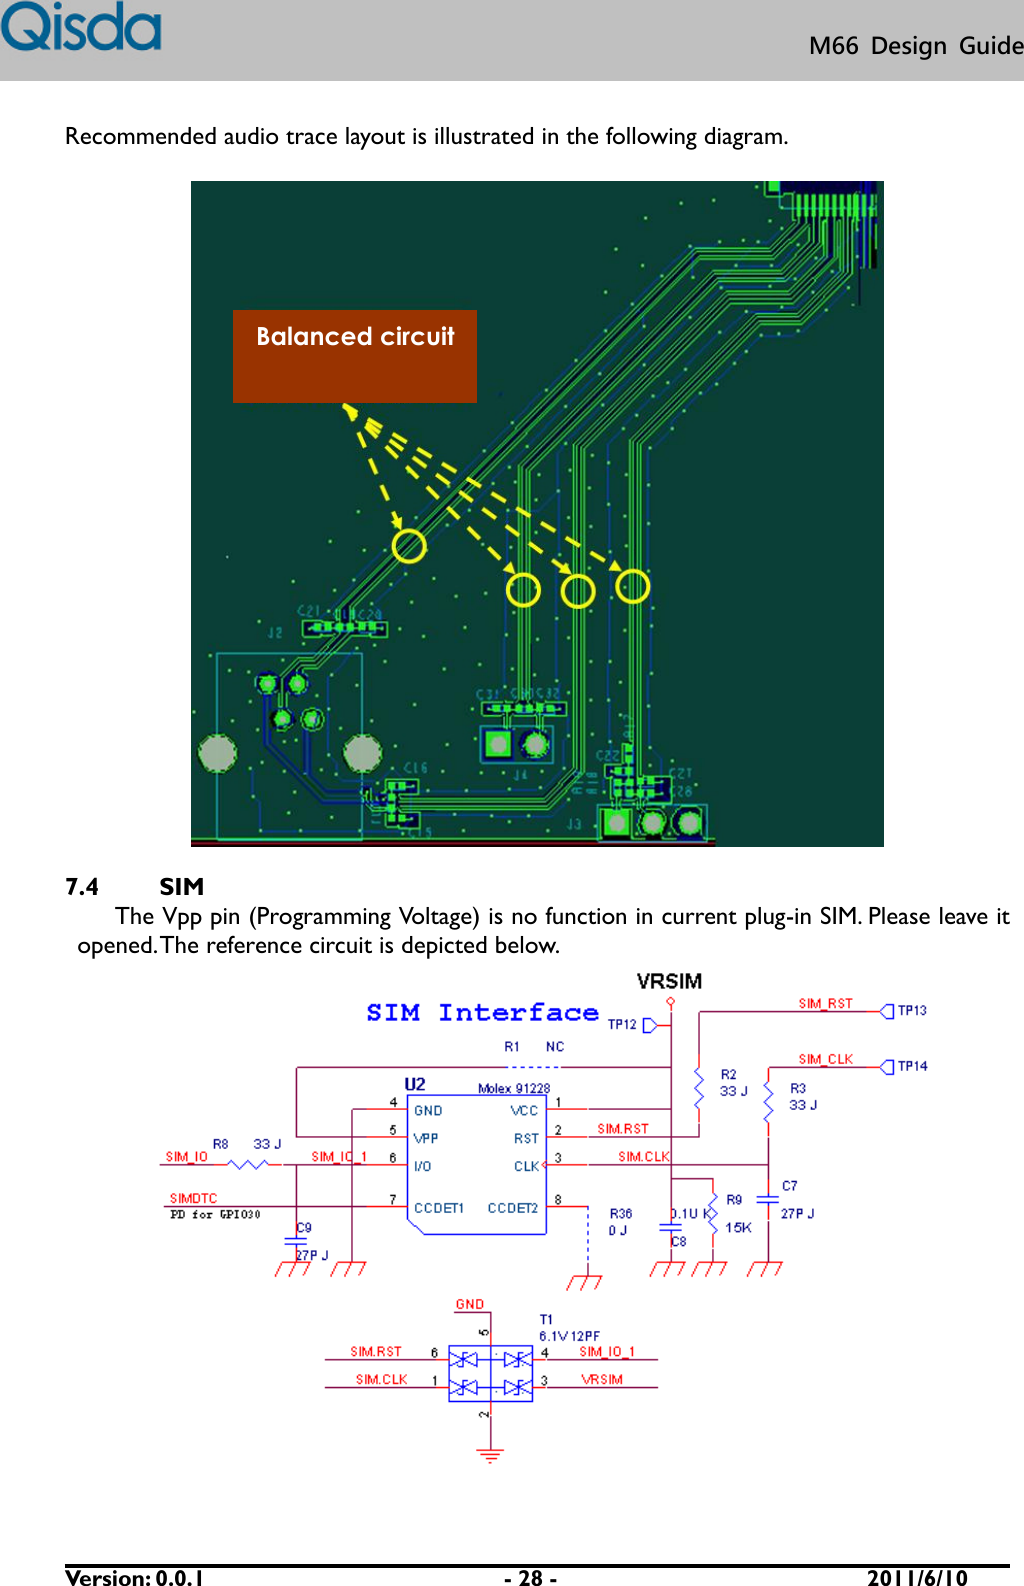      Version: 0.0.1                          - 28 -                           2011/6/10 M66  Design  Guide Recommended audio trace layout is illustrated in the following diagram.    7.4 SIM The Vpp pin (Programming Voltage) is no function in current plug-in SIM. Please leave it opened. The reference circuit is depicted below.  Balanced circuit 